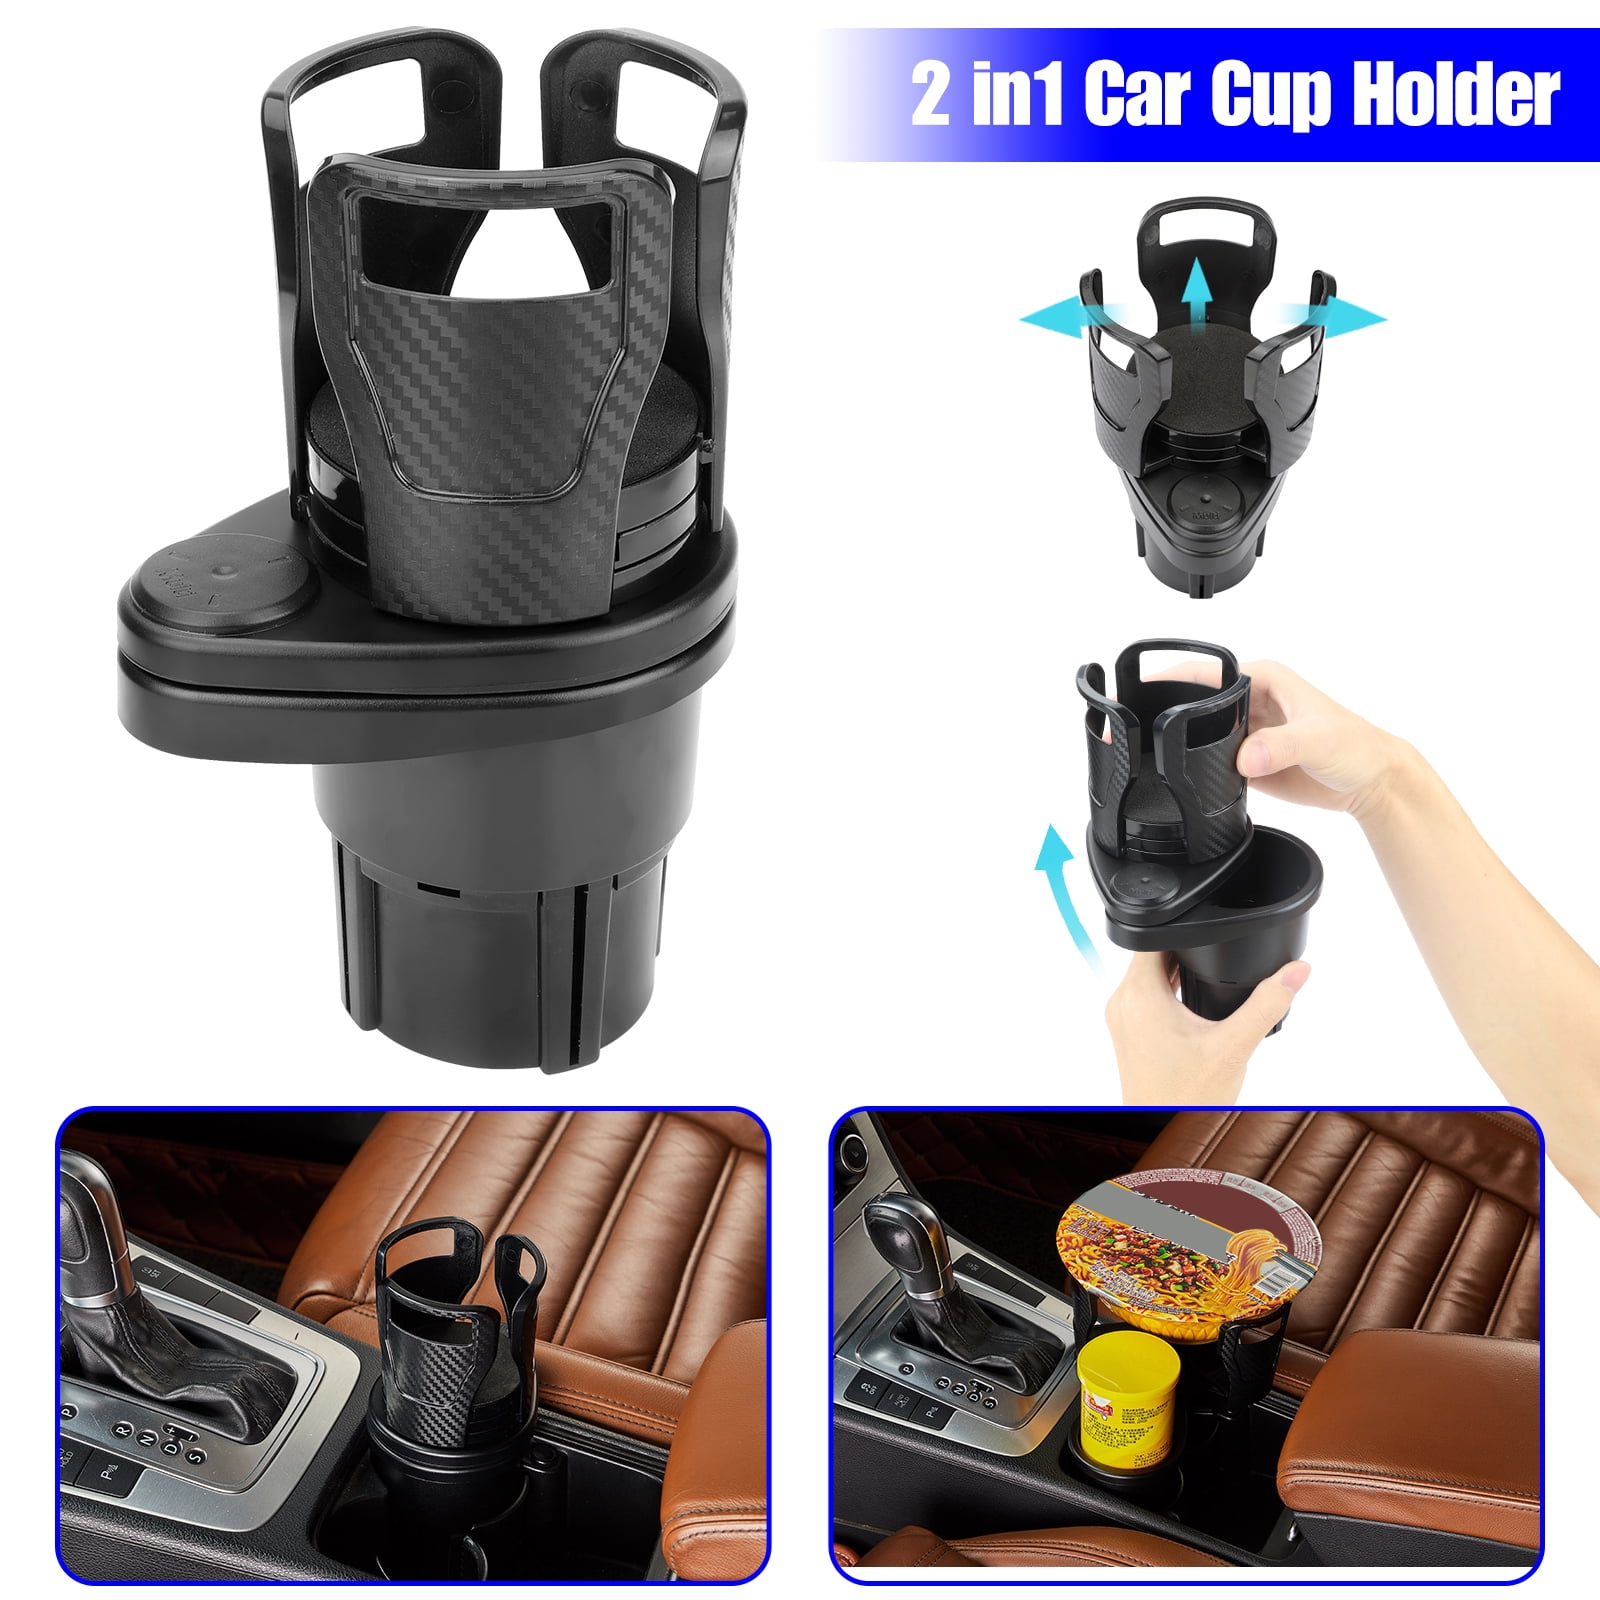 All Purpose Car Cup Holder and Organizer Mount Extender with 360° Rotating Adjustable Base Coffee Drinks Bottles Storage Rack Carbon Fiber RFVTGB 2 in 1 Car Cup Holder Expander Adapter 